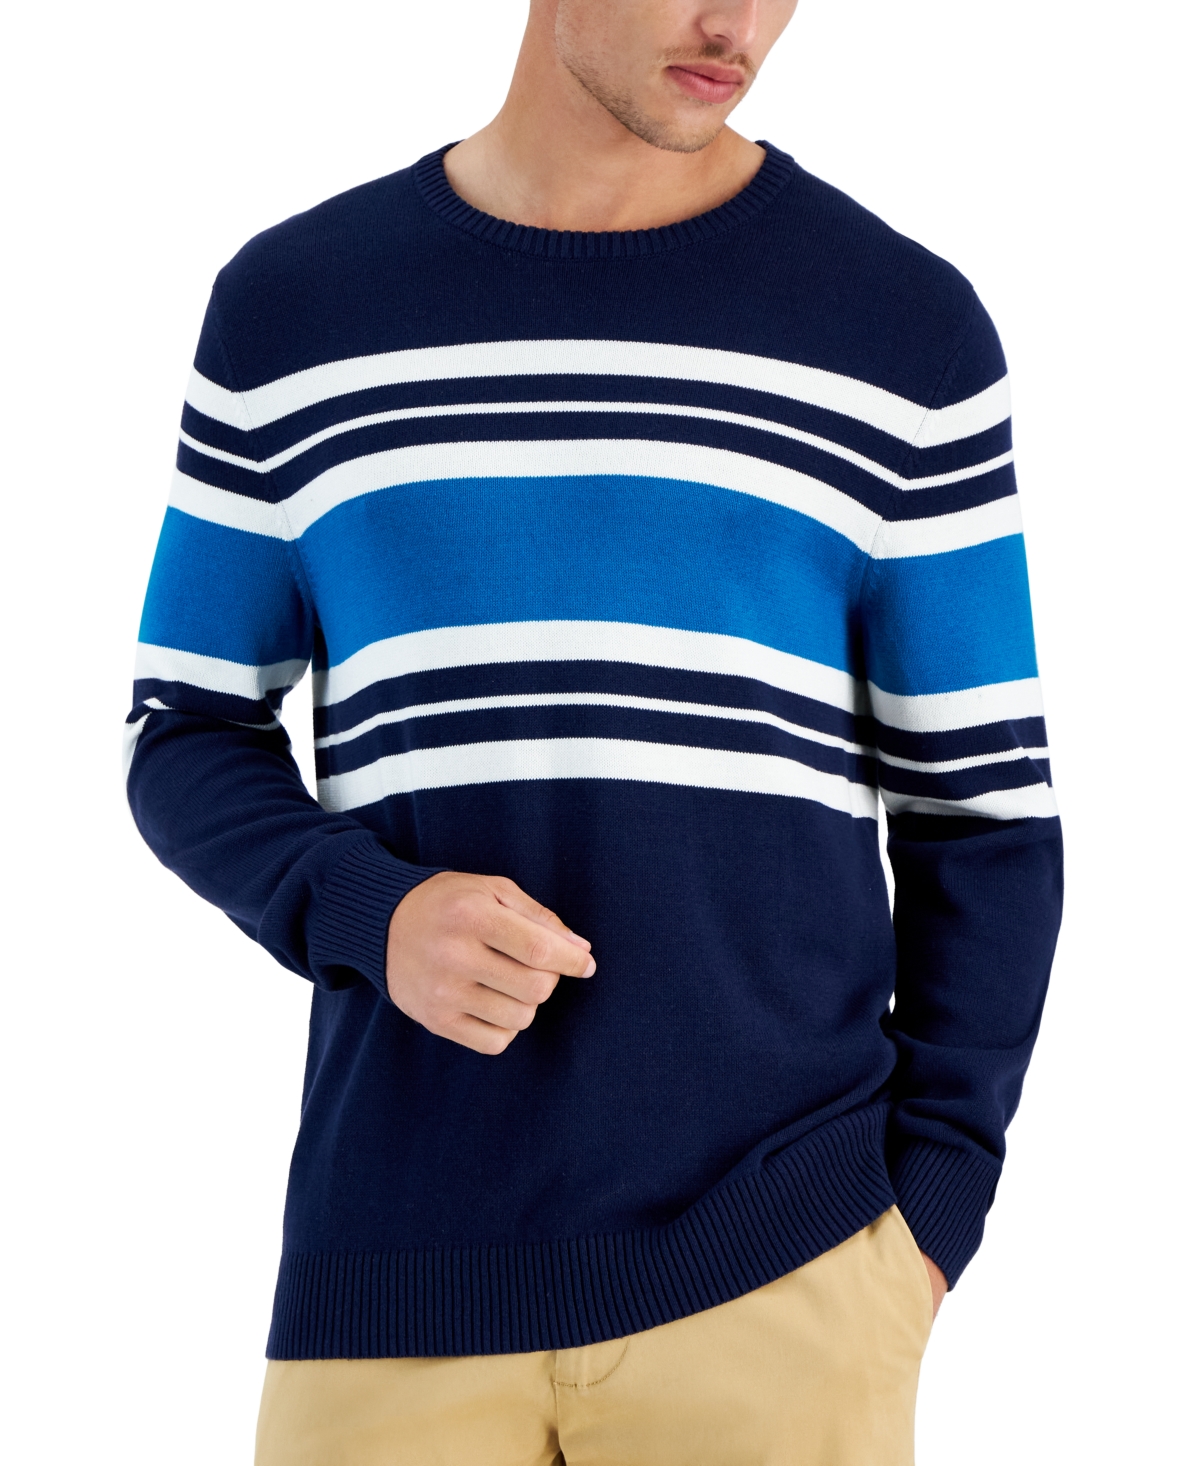 Men's Colin Striped Sweater, Created for Macy's - Navy Blue